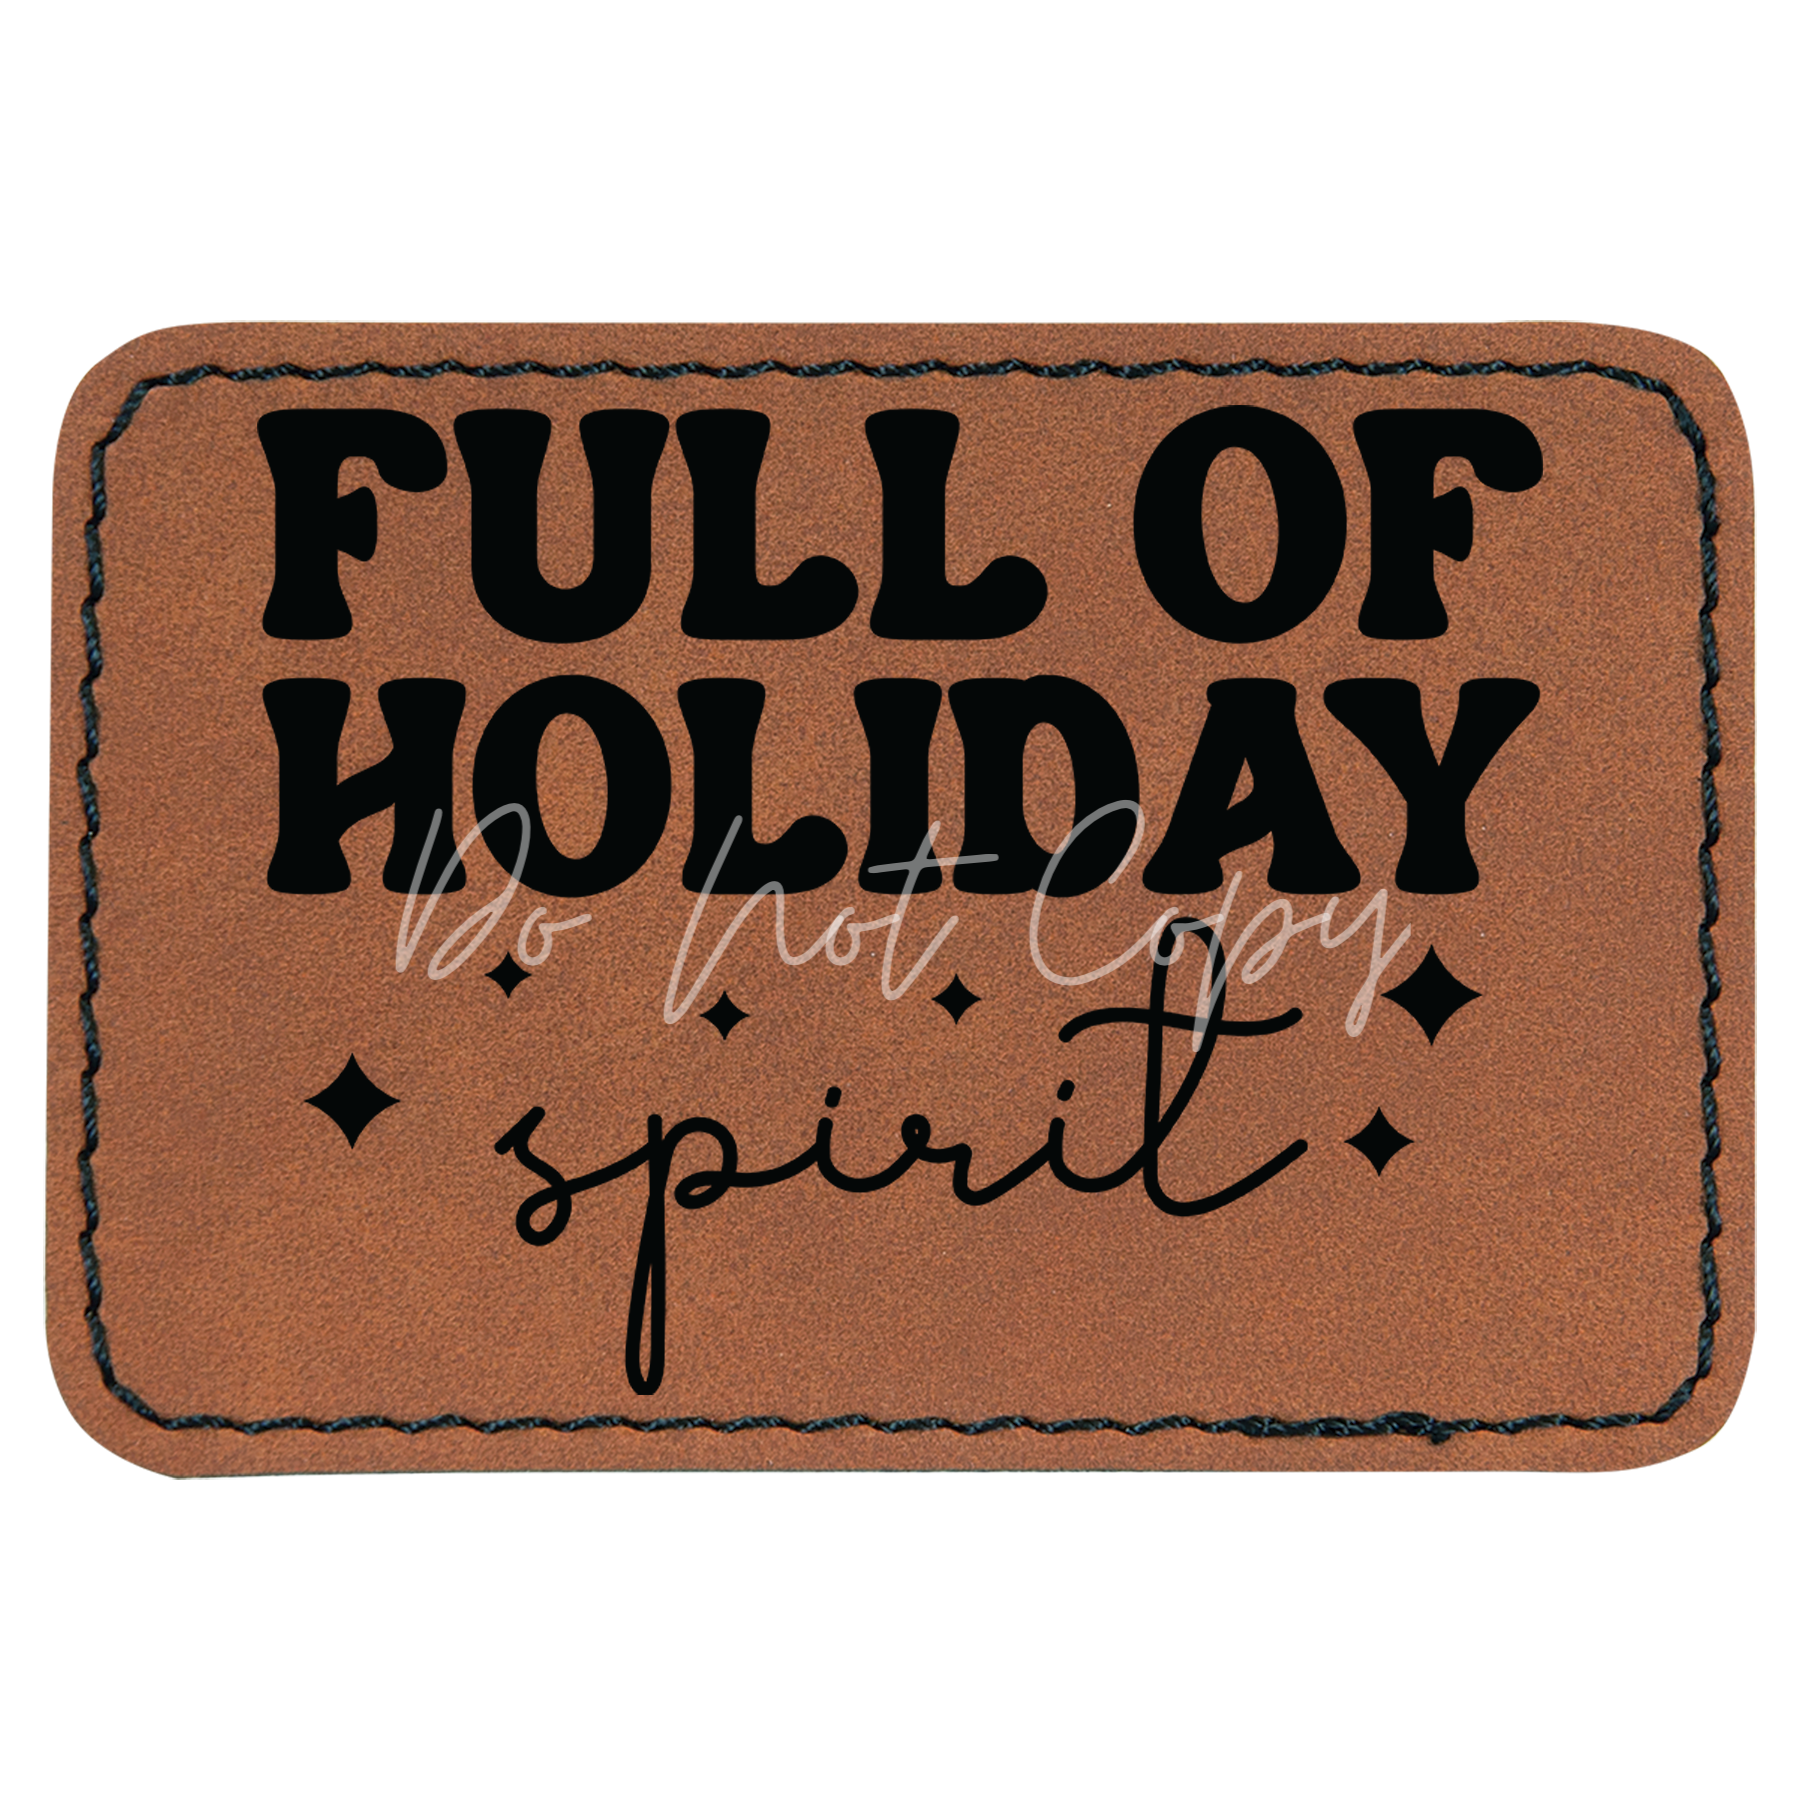 Full of Holiday Spirit Patch